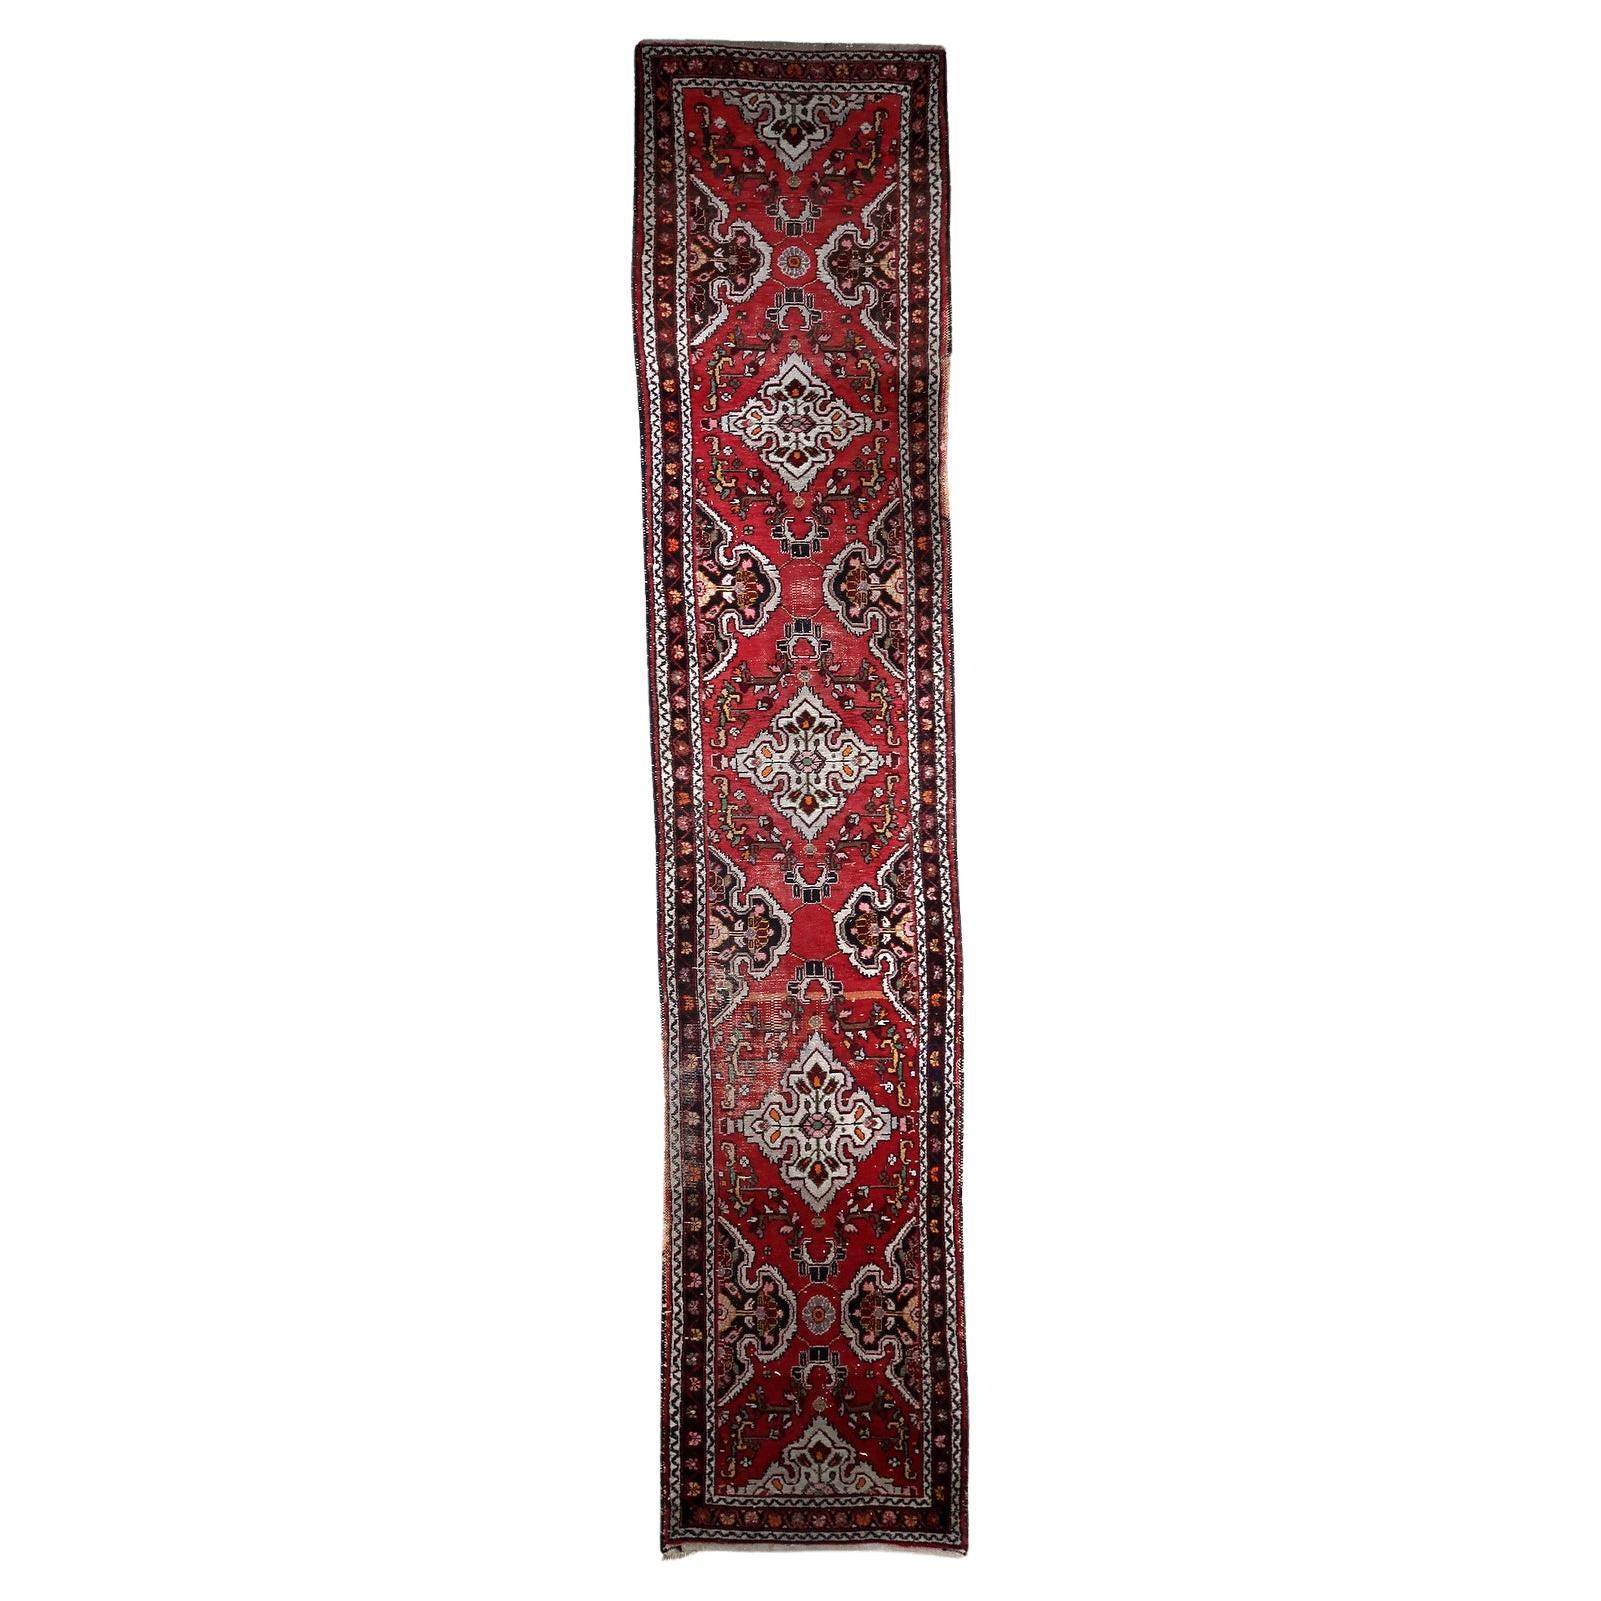 Handmade Antique Persian Malayer Runner Rug 2.5' x 12.5', 1920s - 1C1143 For Sale